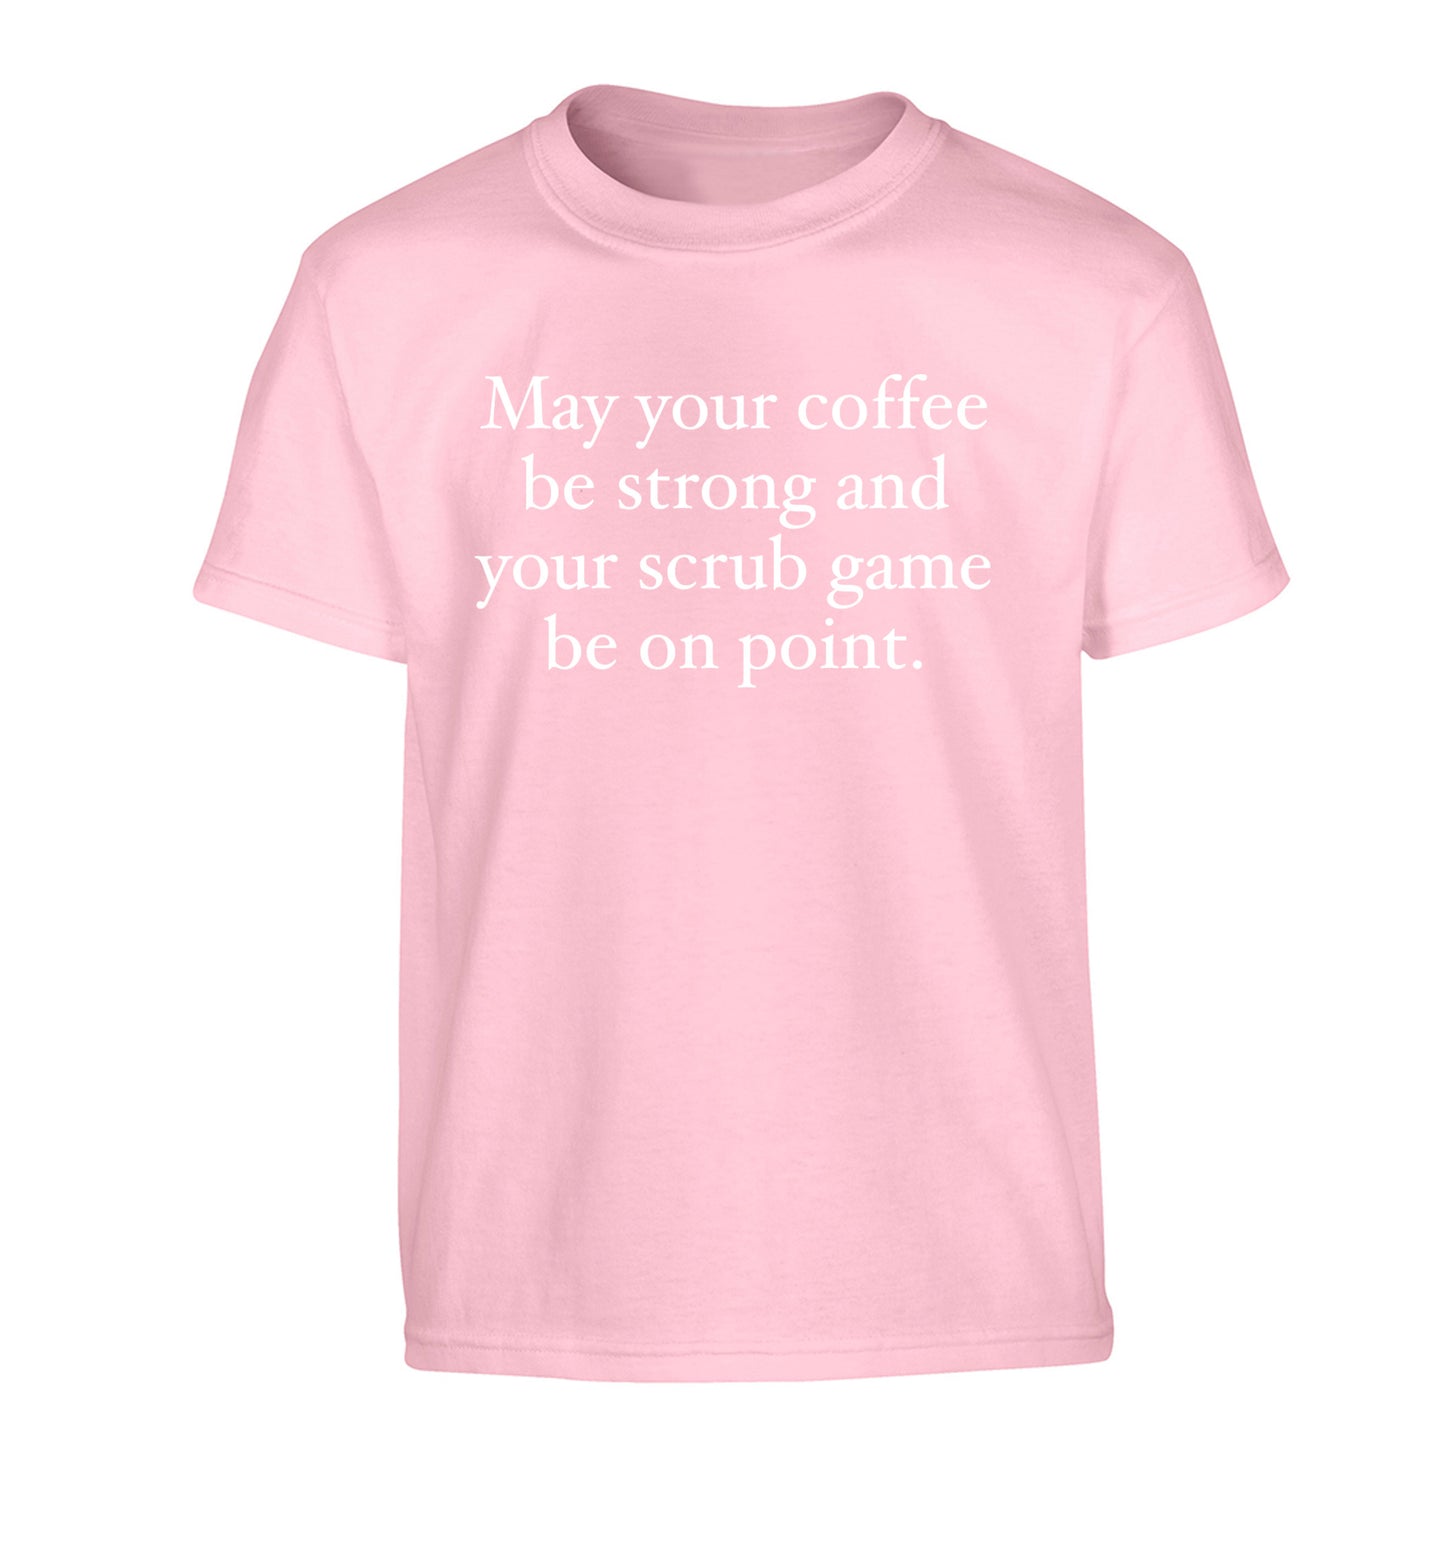 May your caffeine be strong and your scrub game be on point Children's light pink Tshirt 12-14 Years